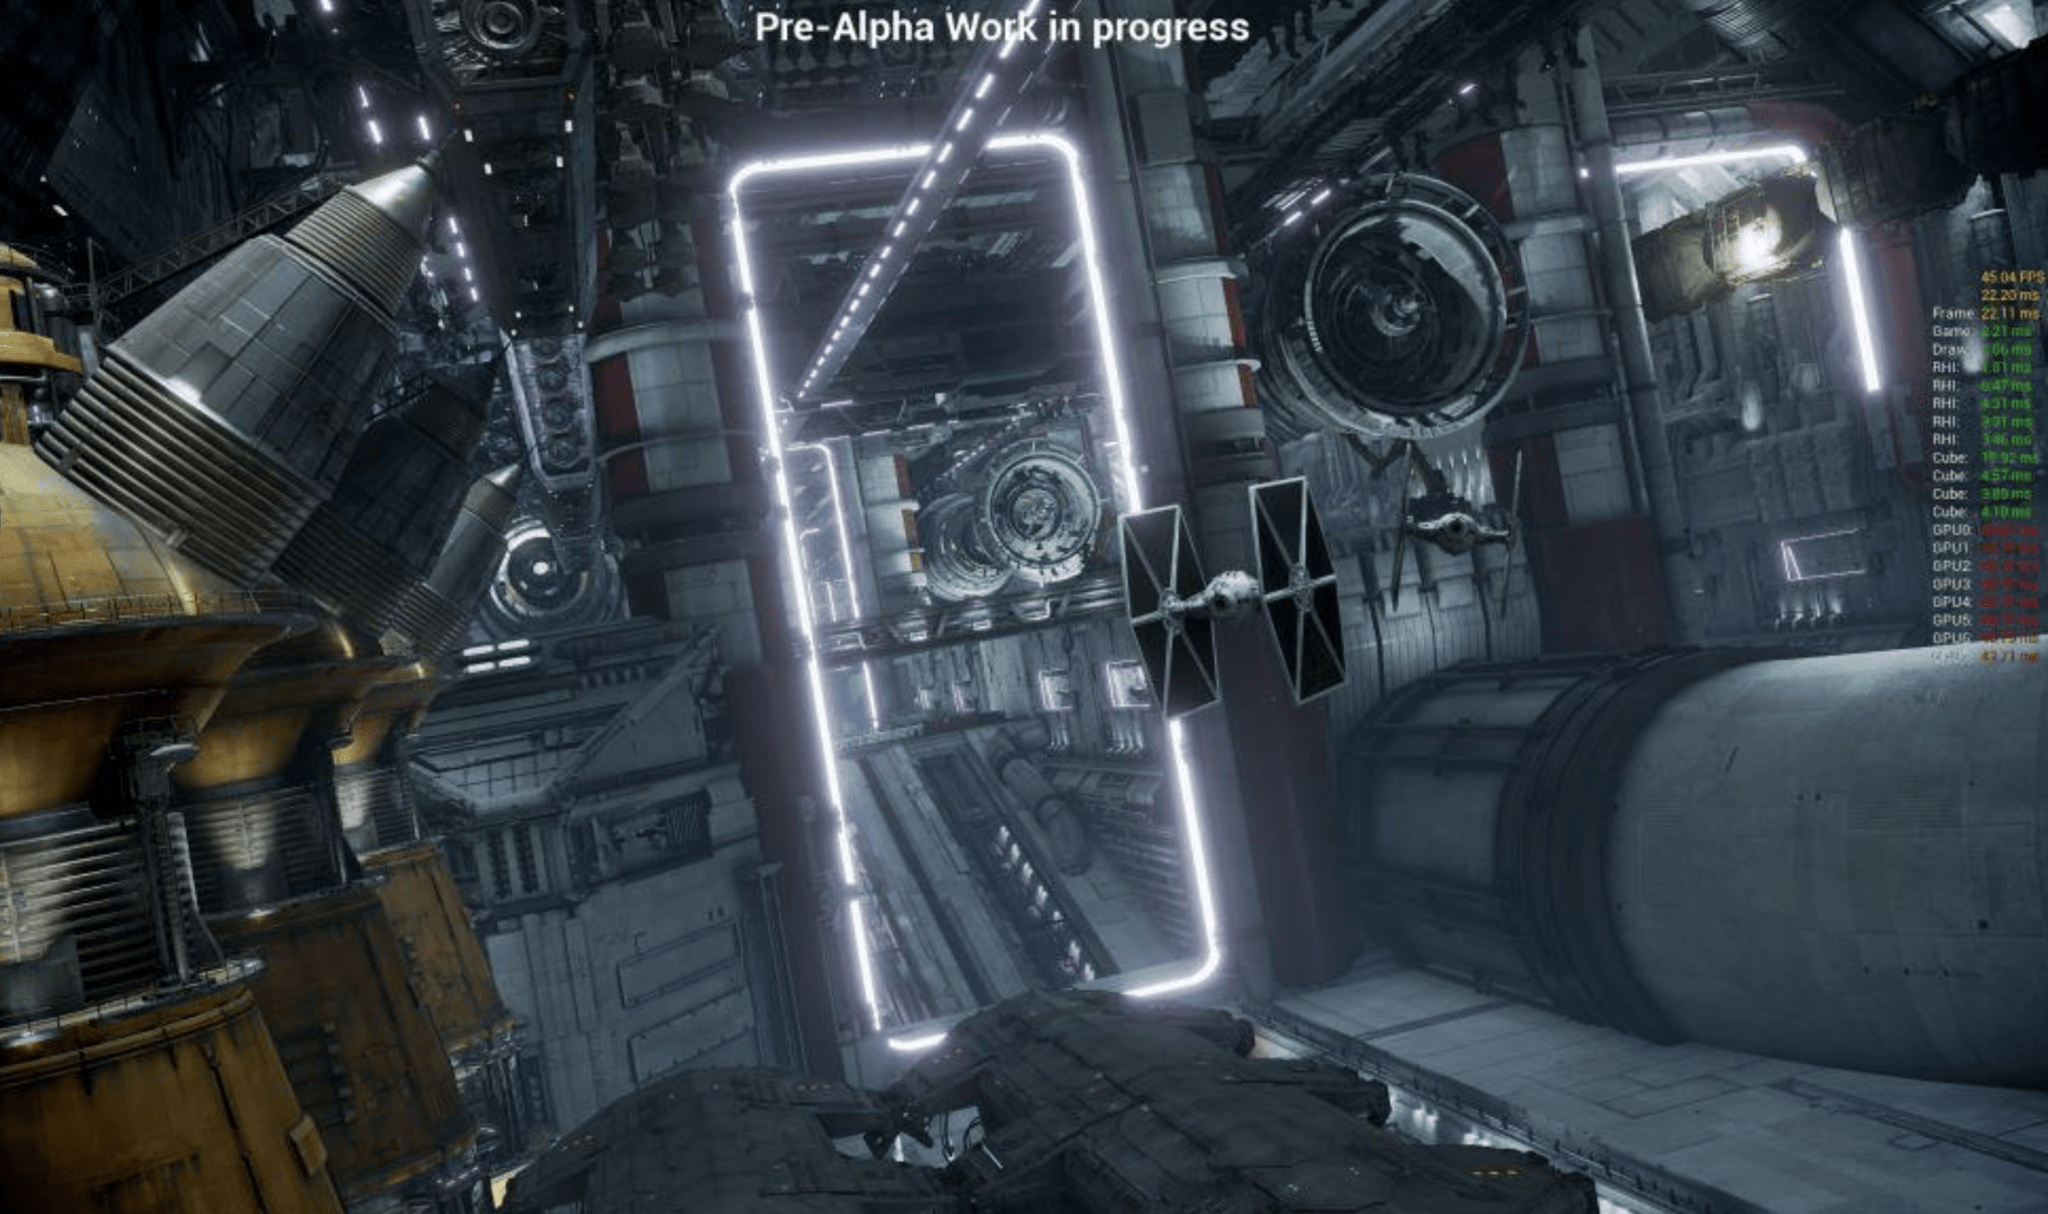 New Tech Being Developed for Millennium Falcon Attraction in Star Wars: Galaxy’s Edge